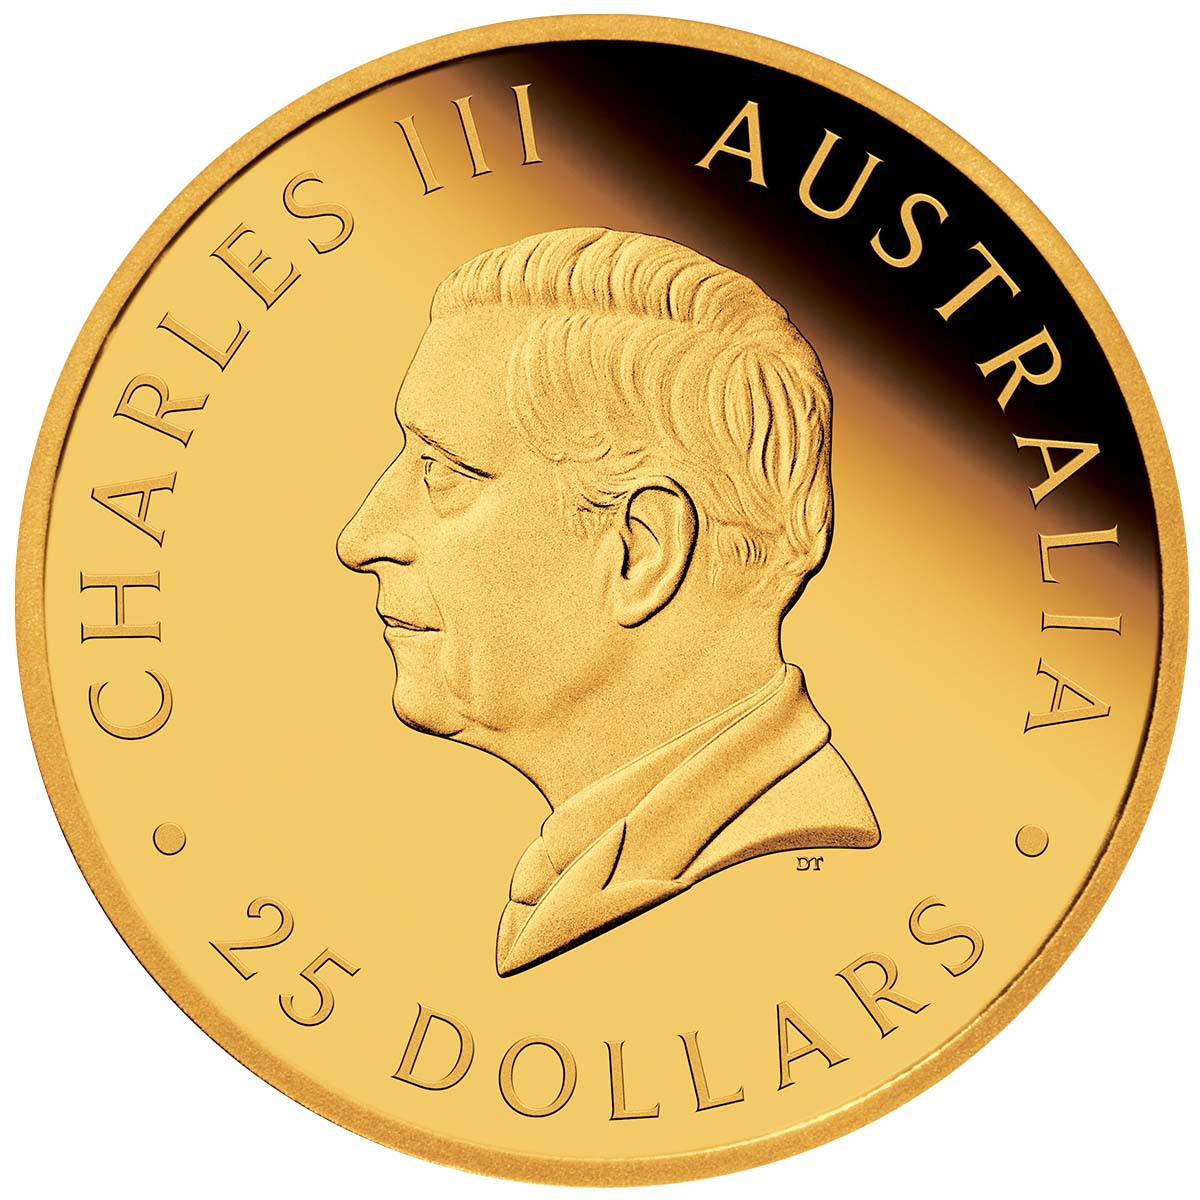 The Perth Mint 125th Anniversary Sovereign 2024 $25 Gold Proof Coin